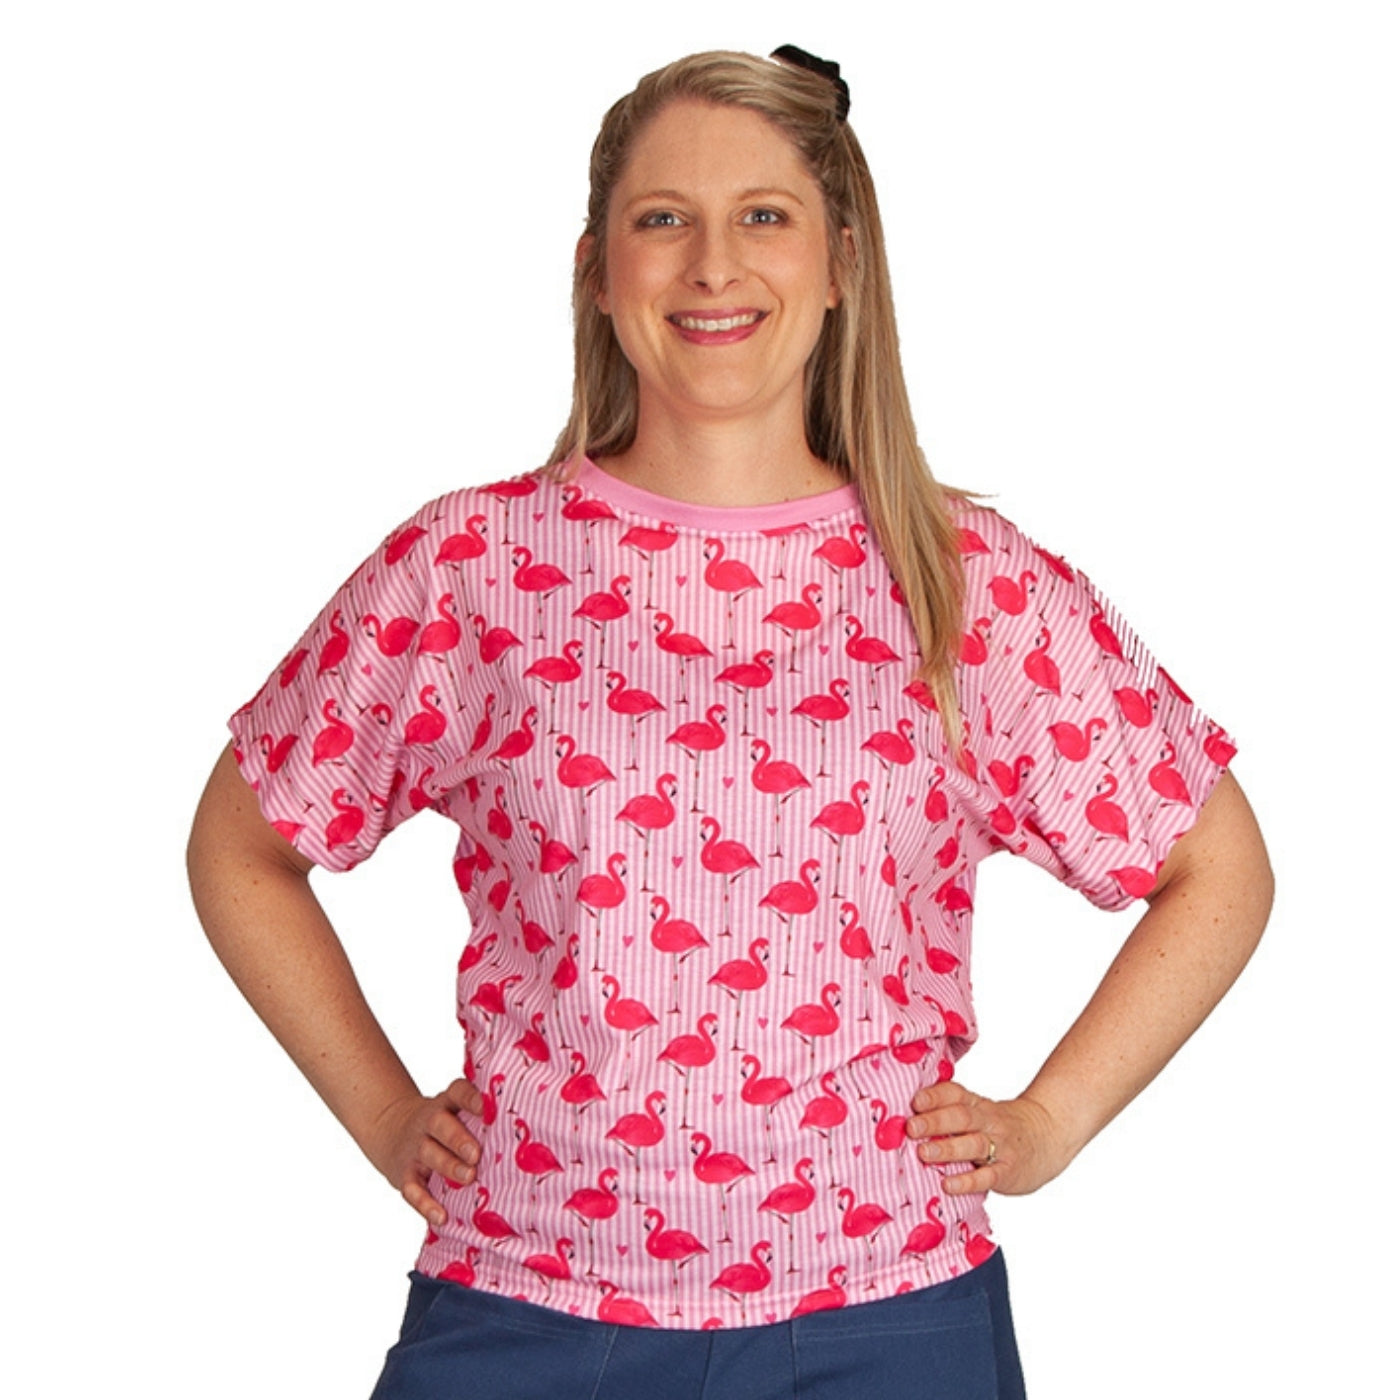 Flamingo Love Batwing Top by RainbowsAndFairies.com (Pink & White - Stripes - Love Hearts - Kitsch - Shirt - Vintage Inspired - Rock & Roll) - SKU: CL_BATOP_FLOVE_ORG - Pic 02